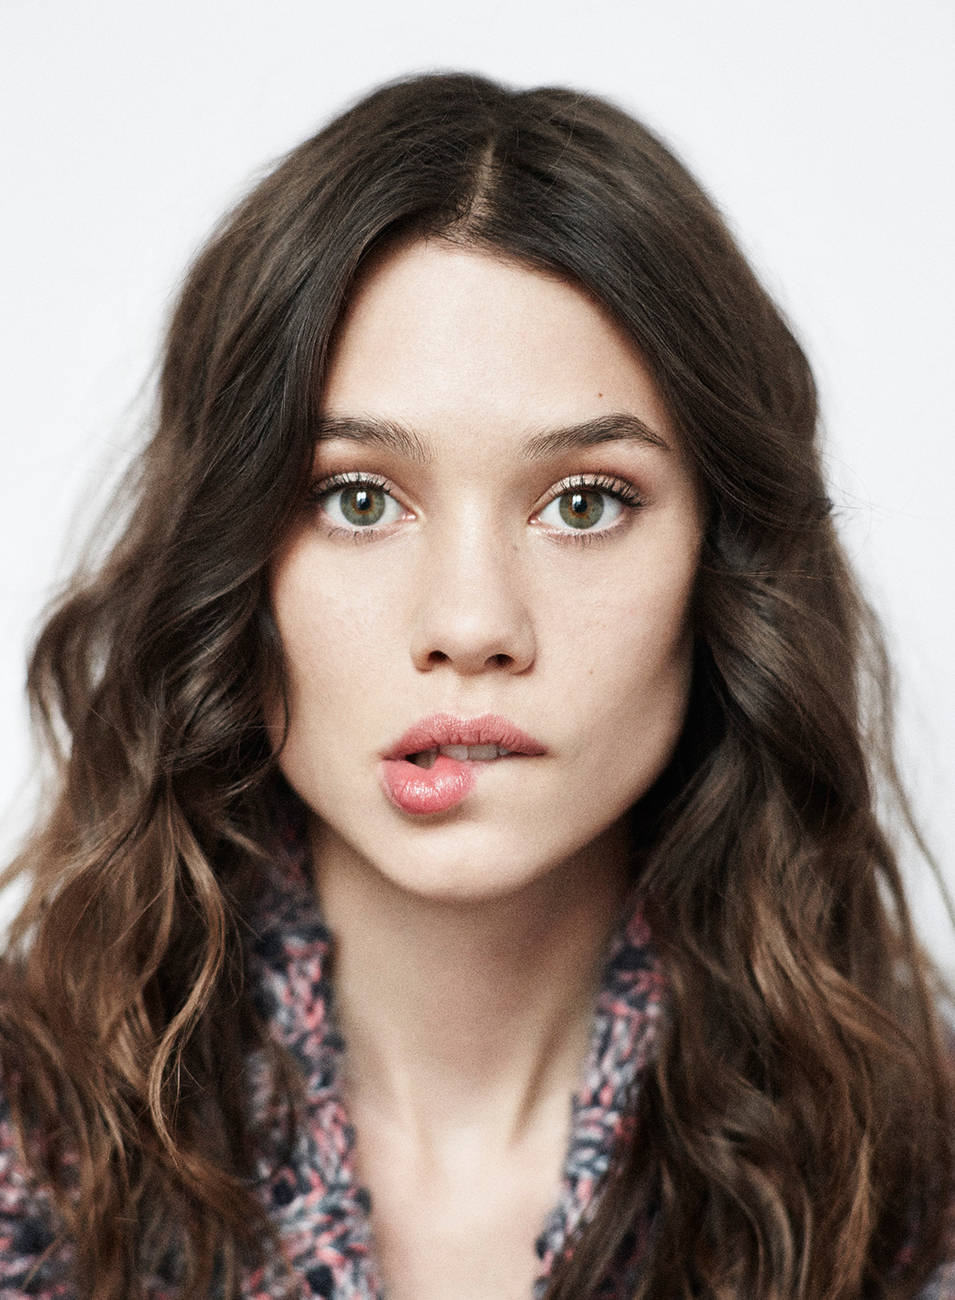 Images of Astrid Bergès-Frisbey | 955x1300